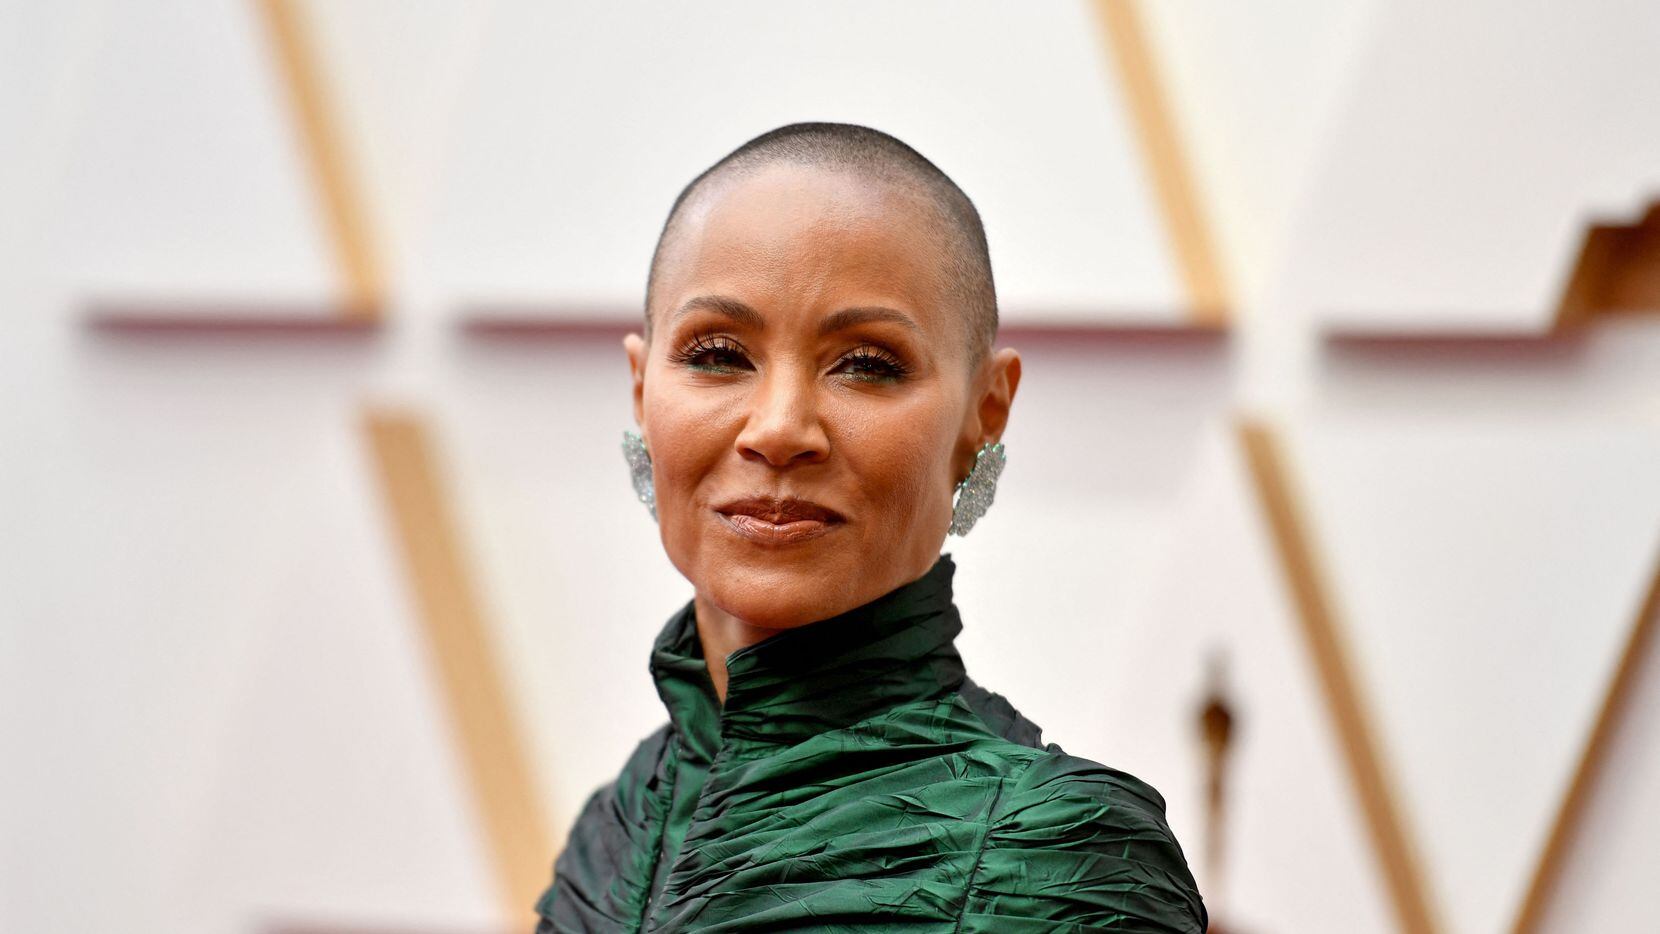 Actress Jada Pinkett Smith attends the Oscars at the Dolby Theatre in Hollywood, California.